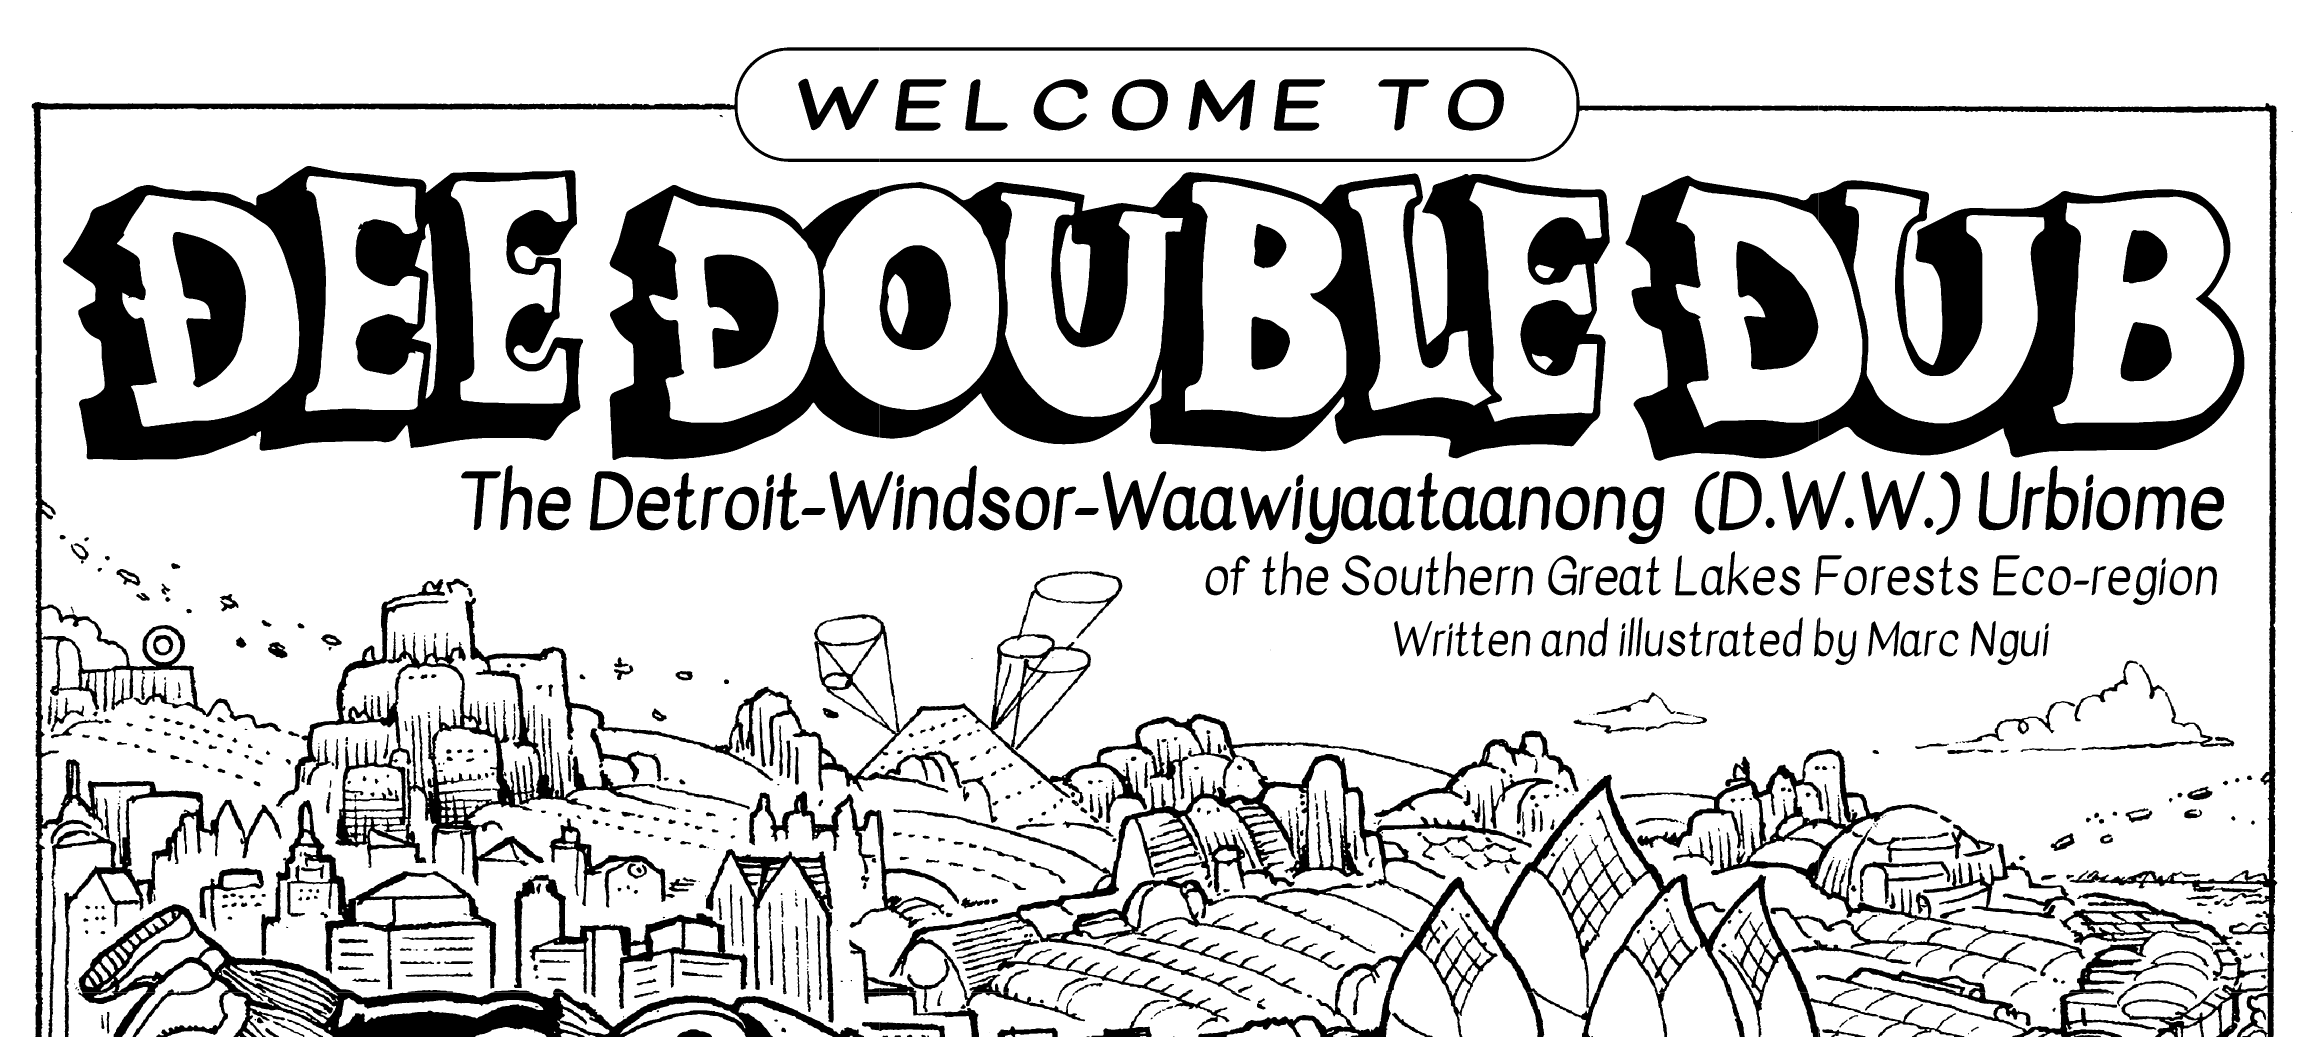 Welcome to Dee Double Dub * Journal of Futures Studies